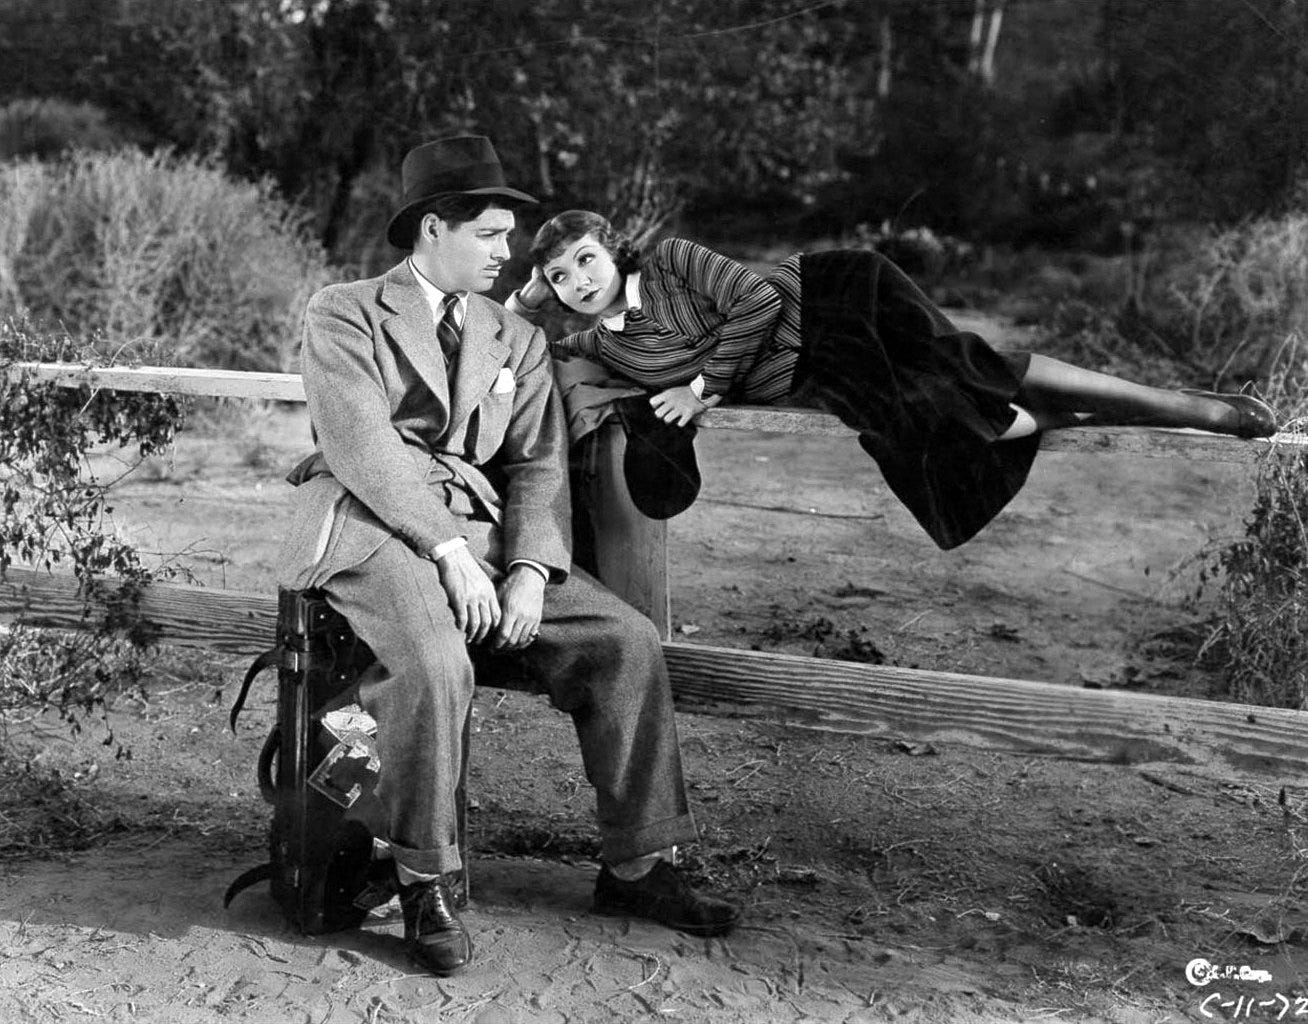 Wrap Shot: It Happened One Night - The American Society of Cinematographers  (en-US)